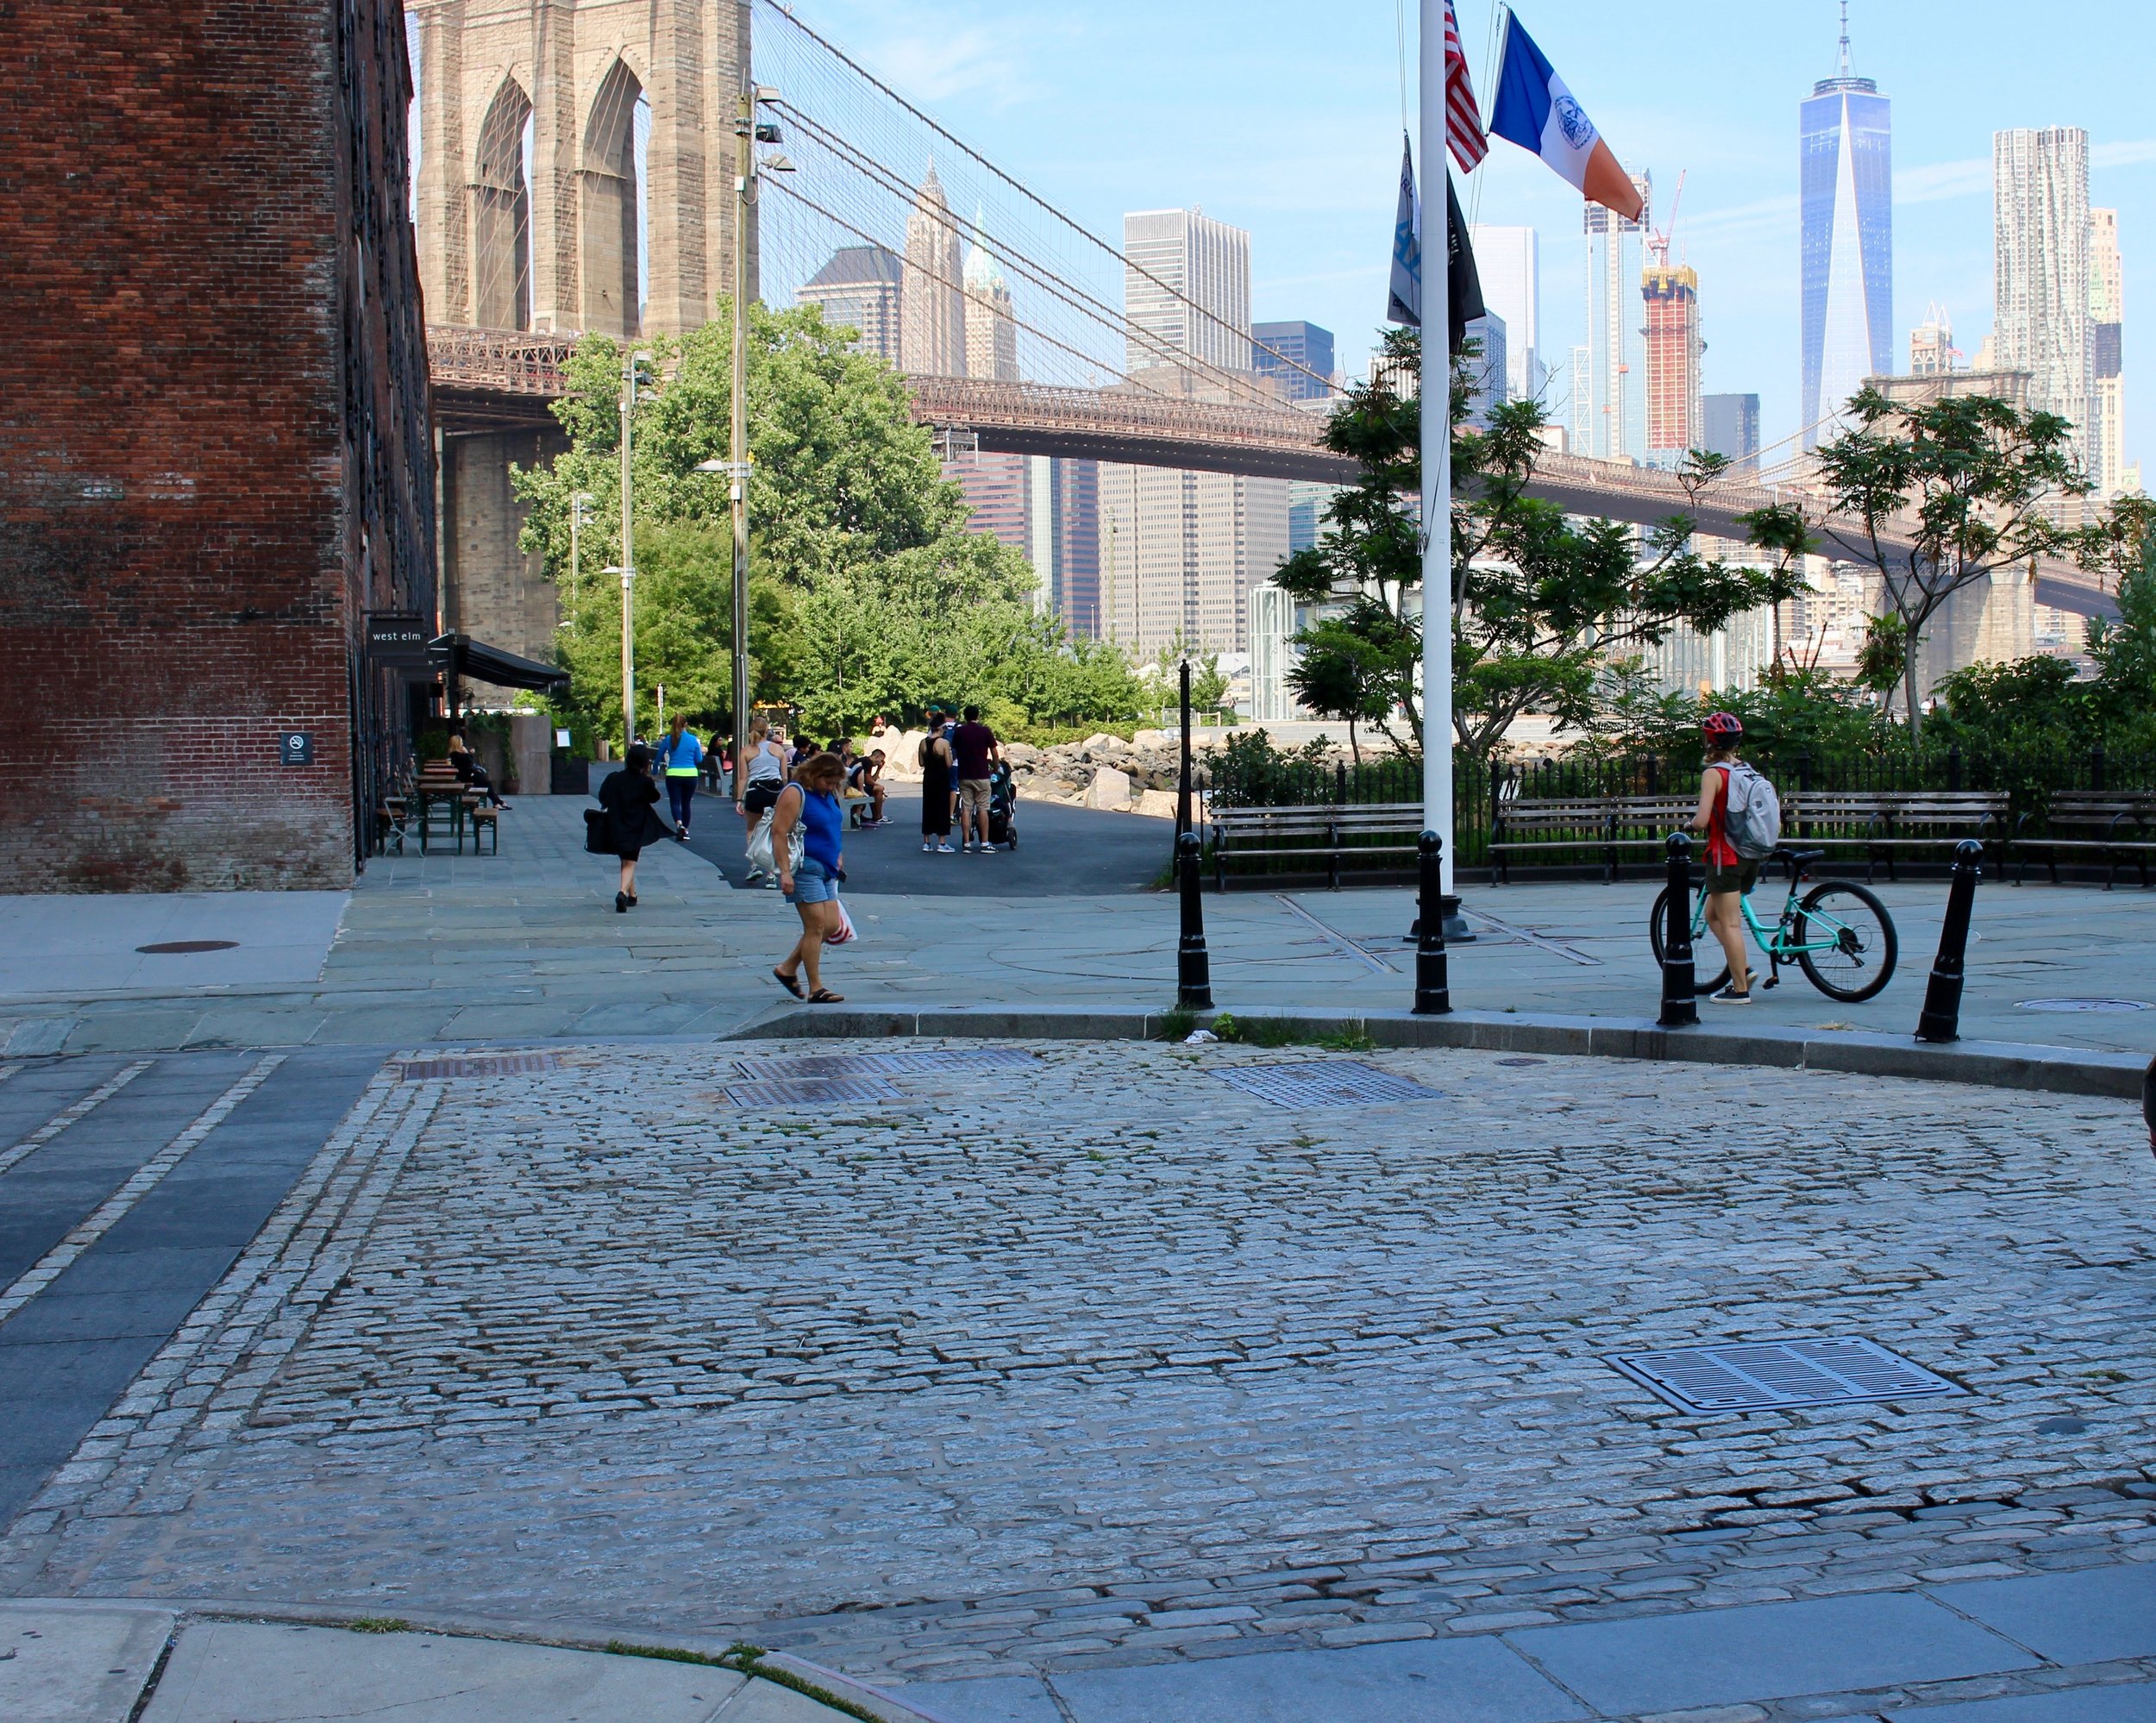  The view from the cobblestone cul-de-sac at Main Street.&nbsp; It's a beautiful, serene spot, where you can continue through Brooklyn Bridge Park.&nbsp; This view is looking south.&nbsp; Note the Brooklyn Bridge and downtown NYC in all its glory.&nb